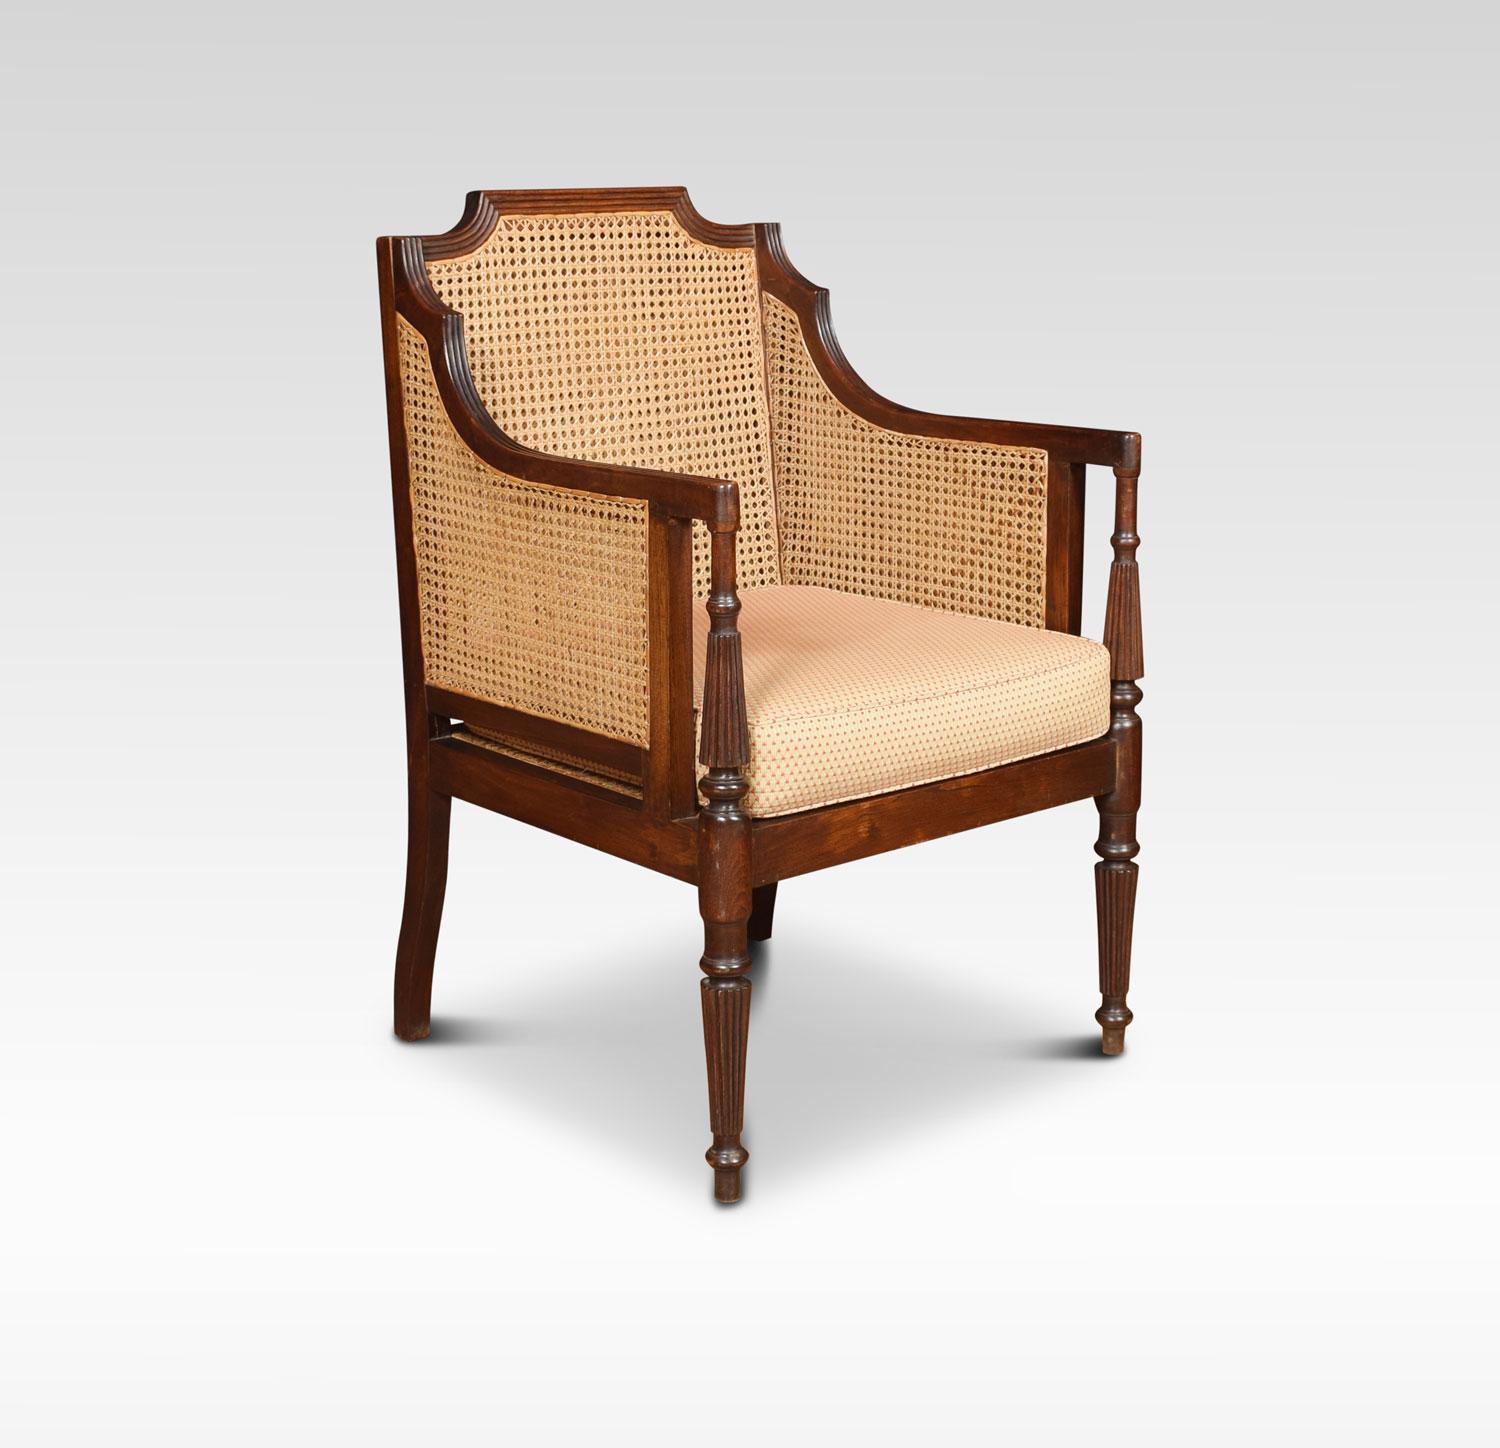 Bergère armchair, the solid oak reeded frame and inset double bergère back and arms. To the seat having removable cushion. All raised up on turned tapering legs.
Dimensions:
Height 39 inches height to seat 19 inches
Width 25 inches
Depth 24